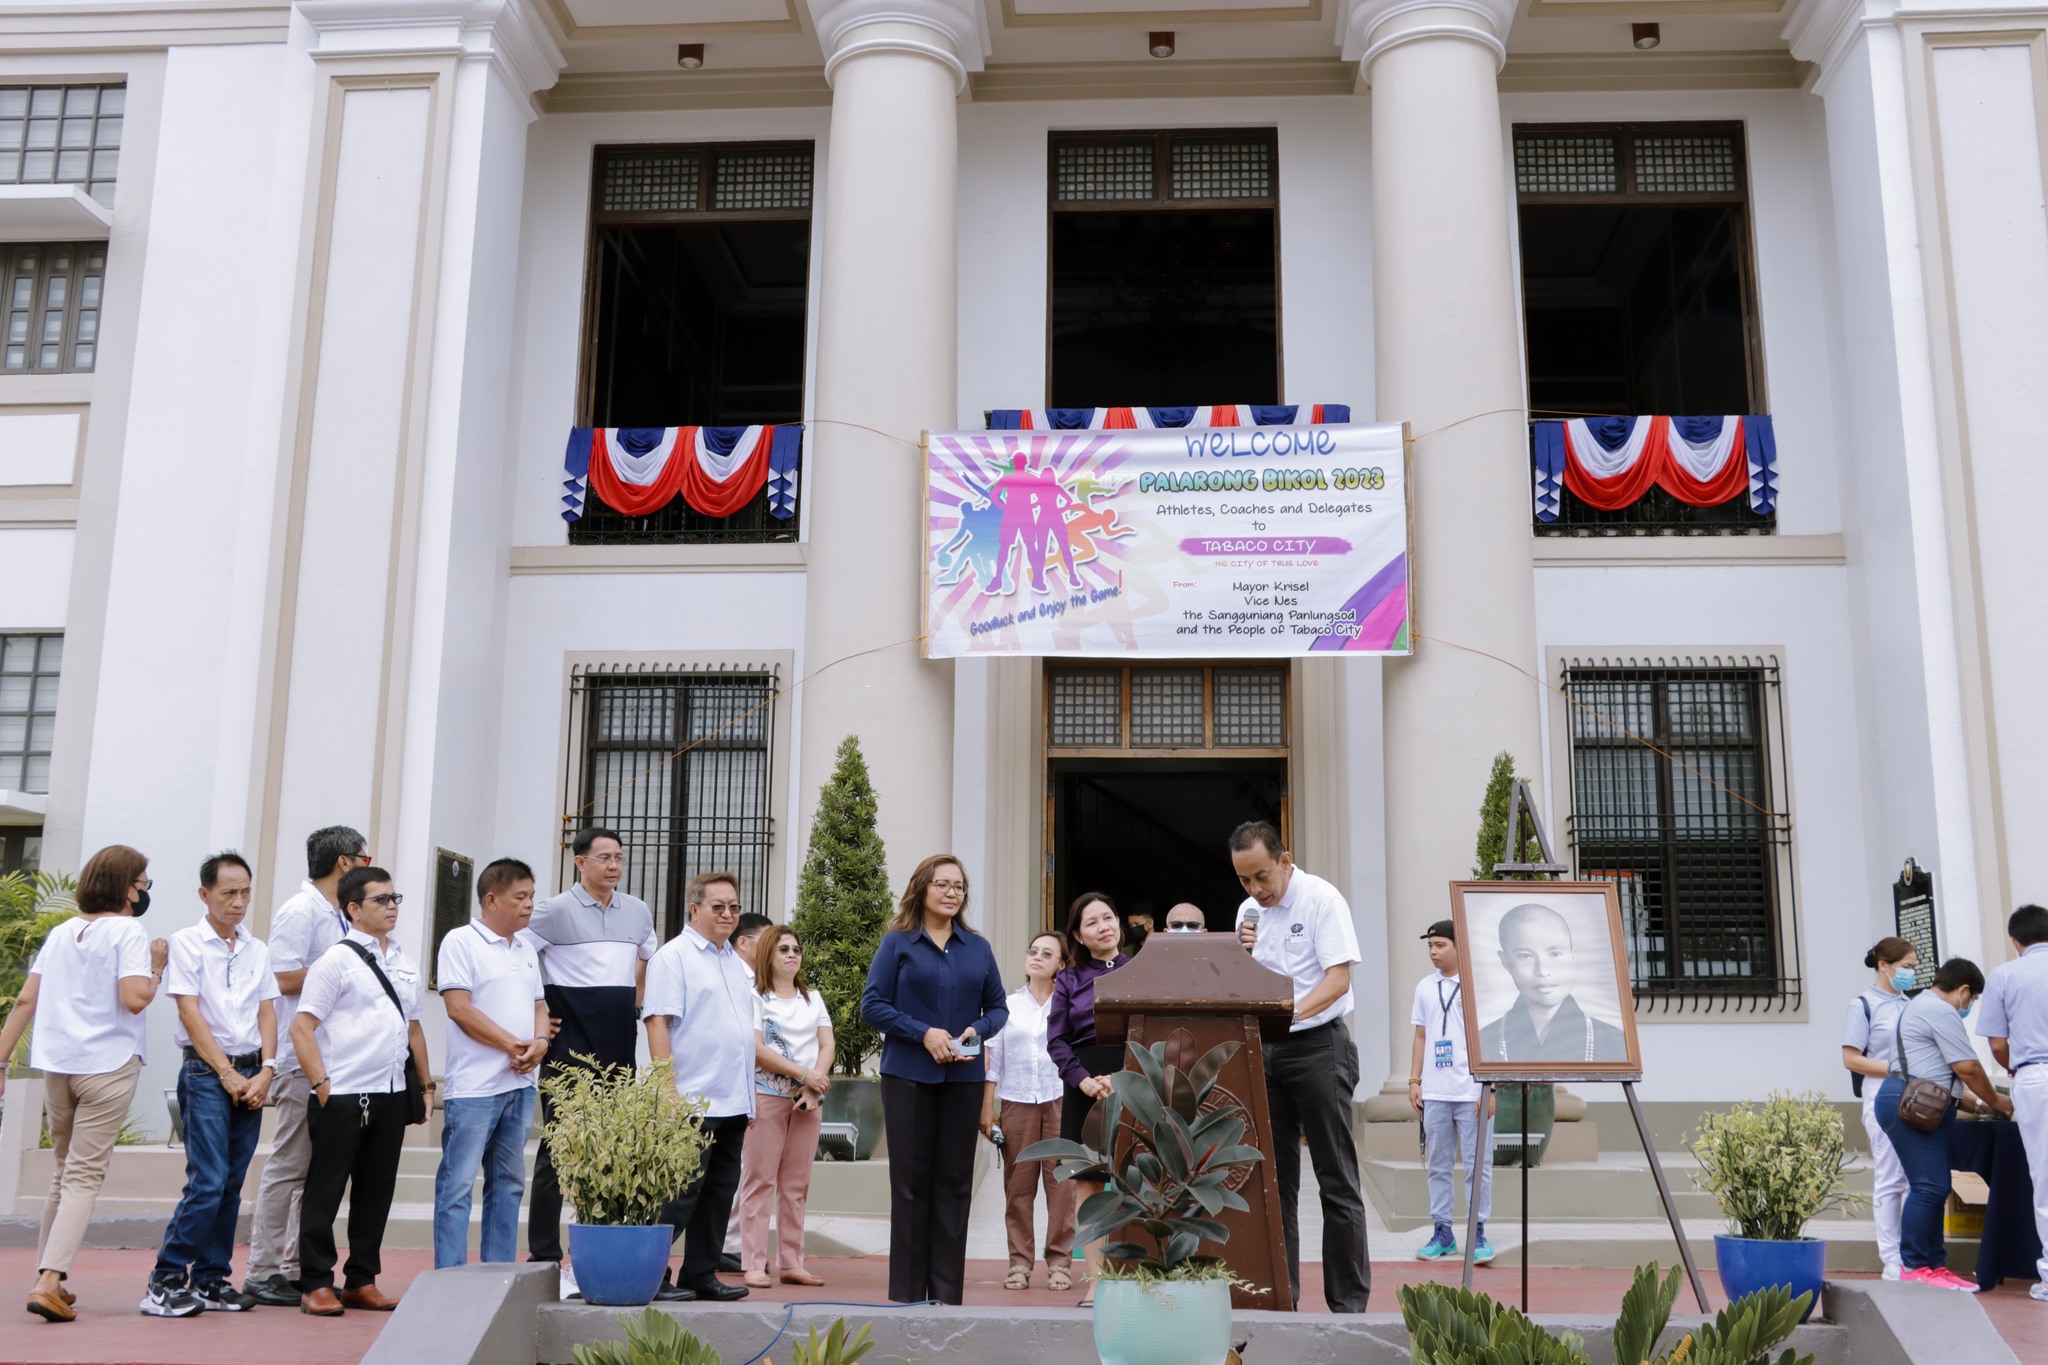 Tabaco City LGU invites the Tzu Chi Foundation Philippines and welcomes its volunteers after their flag-raising ceremony on Monday, April 24. 【Photo from Tabaco City LGU media team】